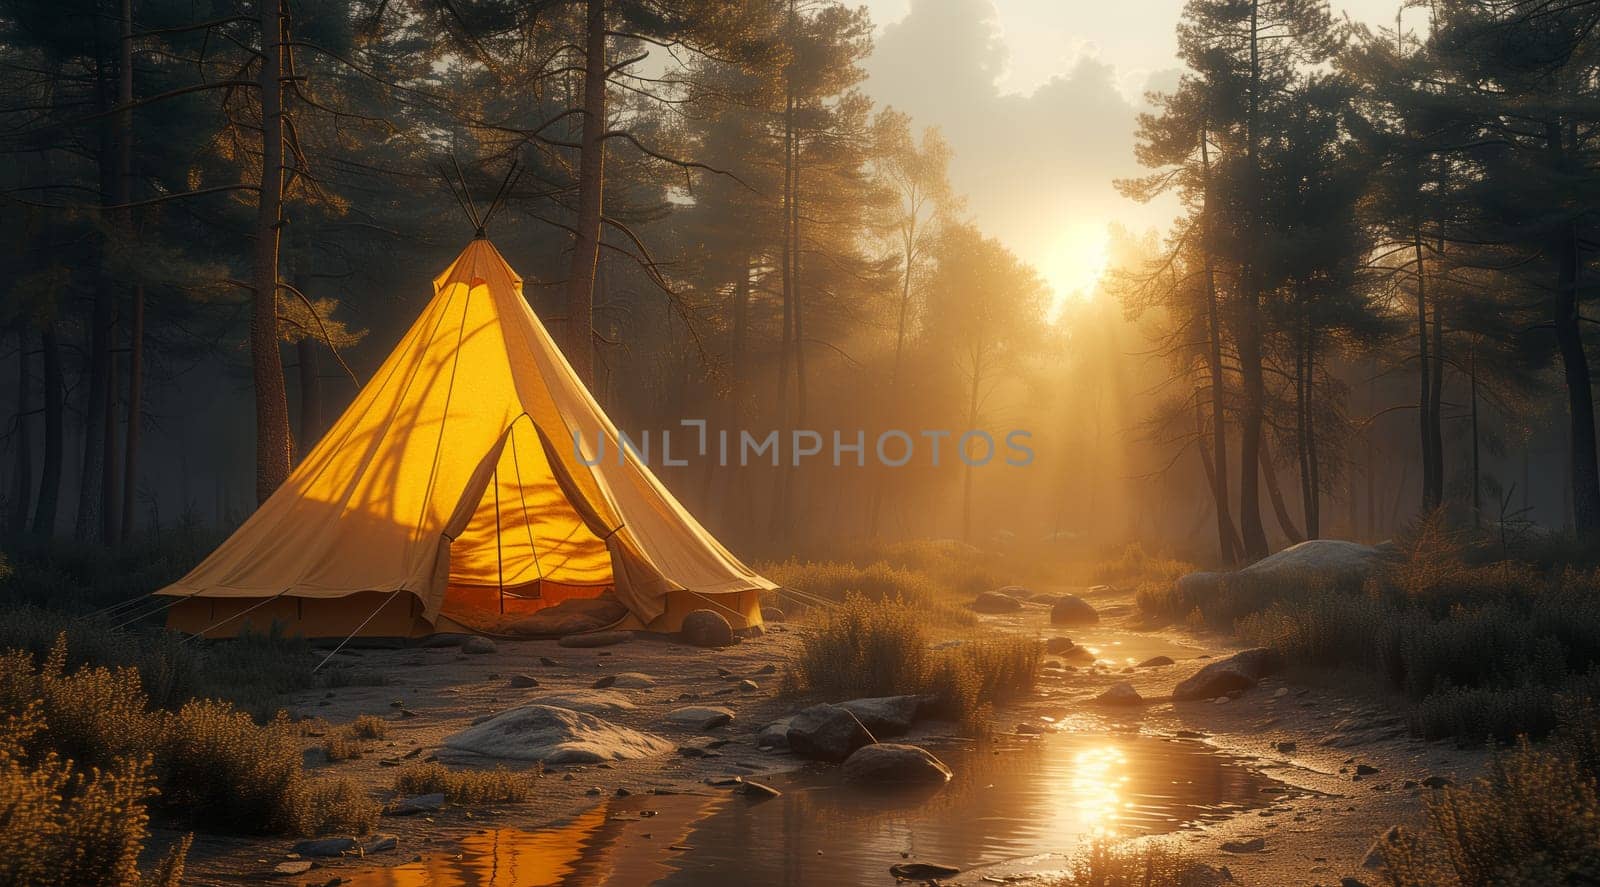 A triangle tent is illuminated by sunlight in the middle of nature, beside a river in a forest. The tranquil morning scene is perfect for travel